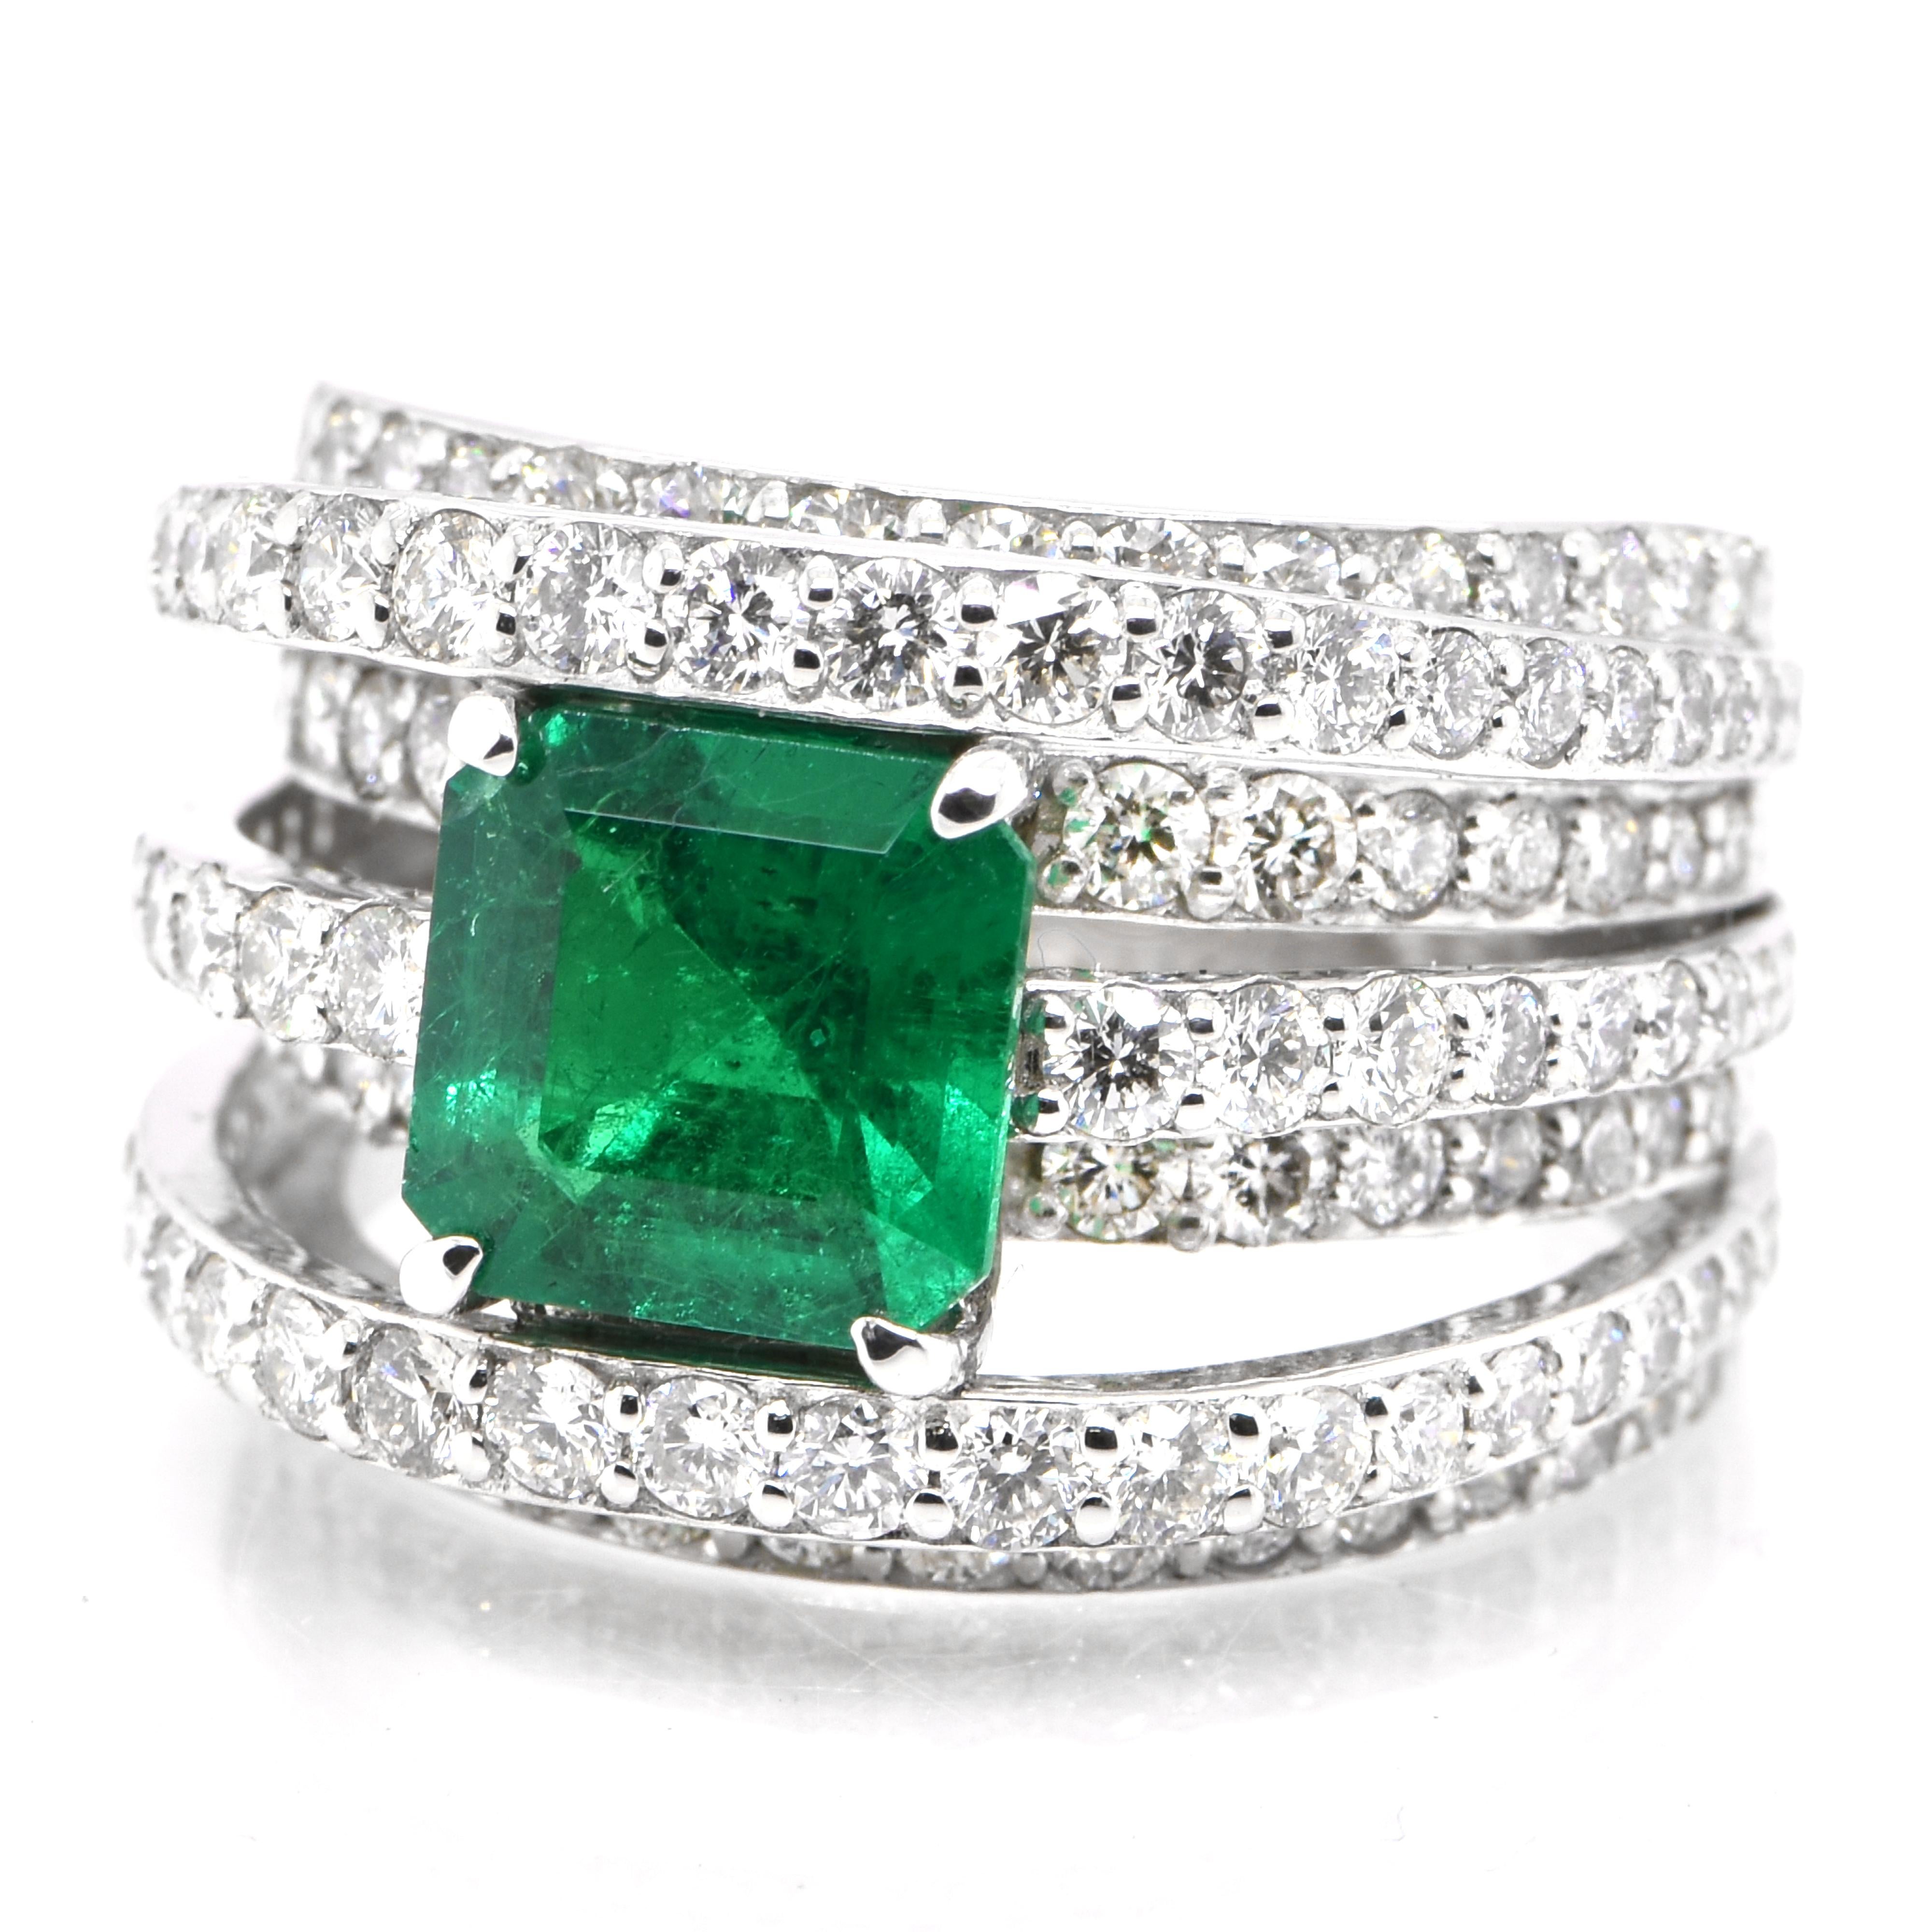 A stunning ring featuring a 1.66 Carat Natural Colombian Emerald and 2.00 Carats of Diamond Accents set in Platinum. People have admired emerald’s green for thousands of years. Emeralds have always been associated with the lushest landscapes and the